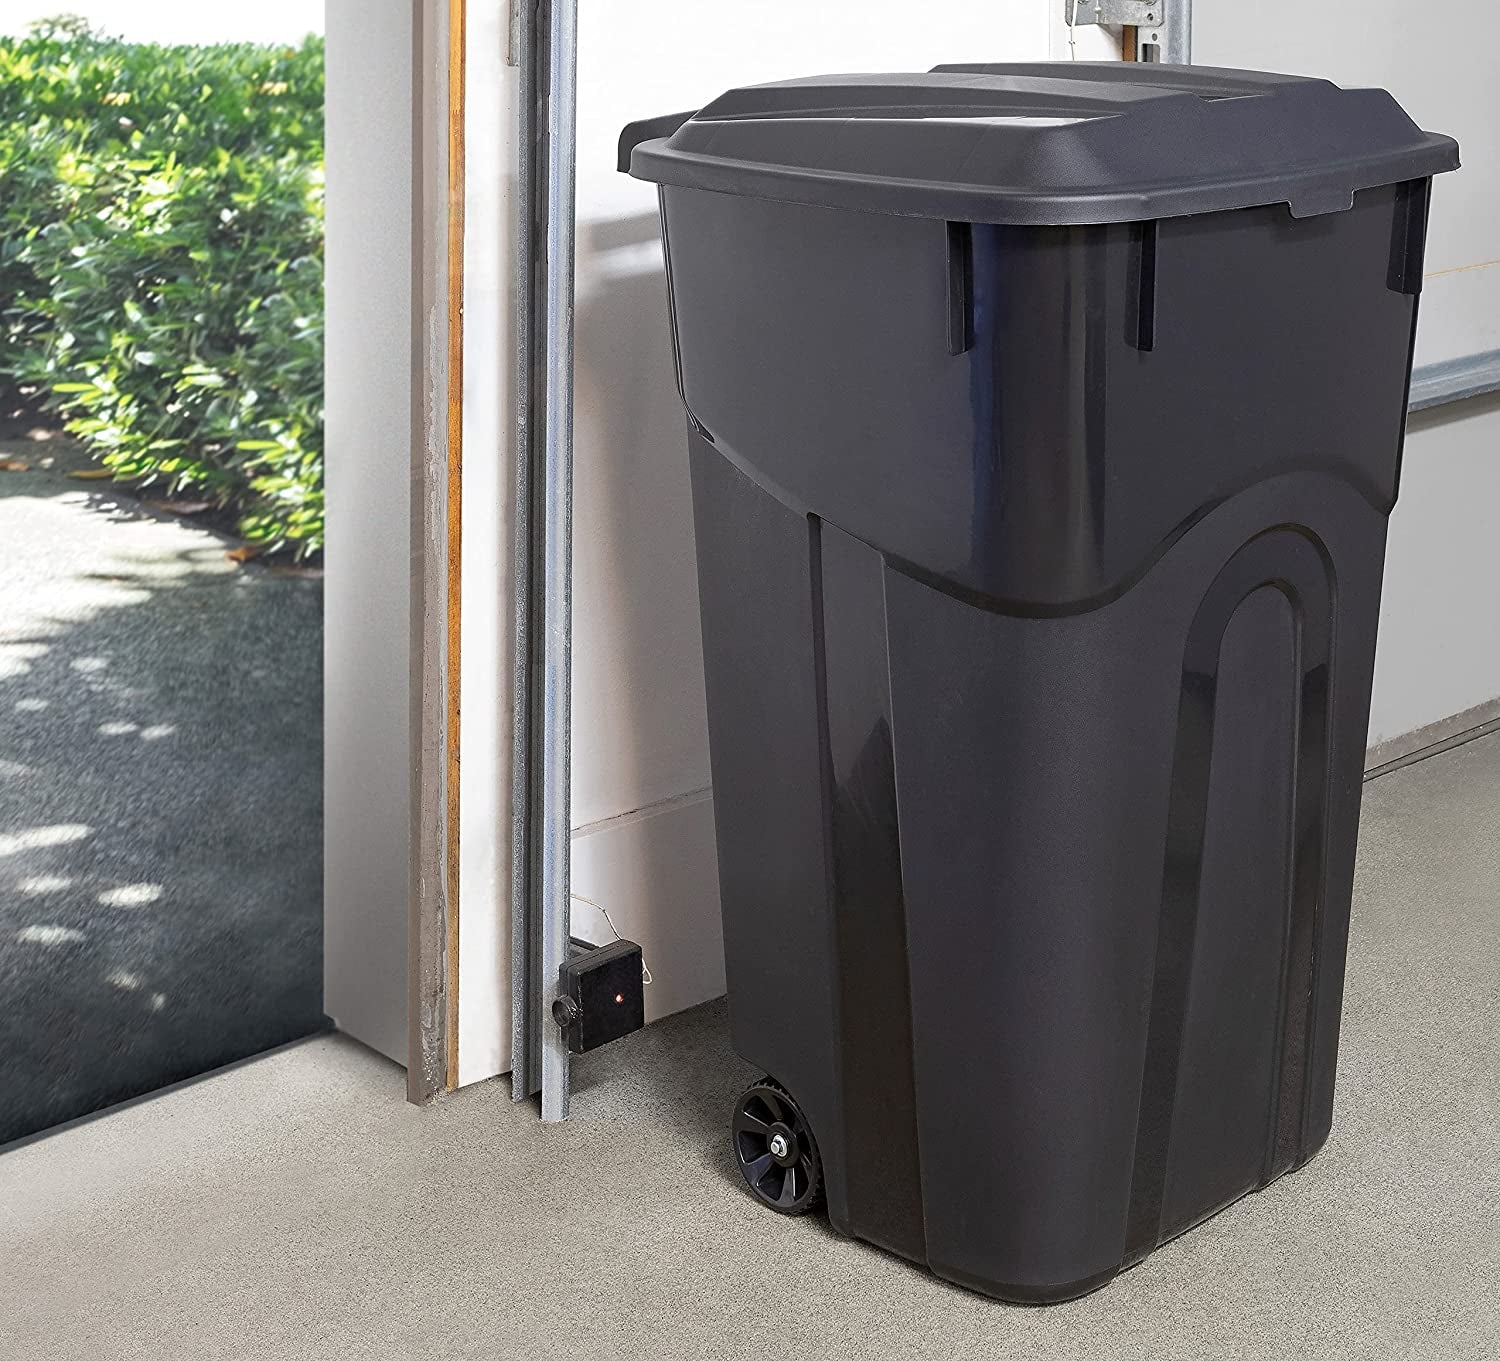 Set of Two 32 Gallon Outdoor Garbage Cans with Wheeled Base, Snap Lock Lid, and Durable Handles - Ideal for Backyards, Decks, and Garages